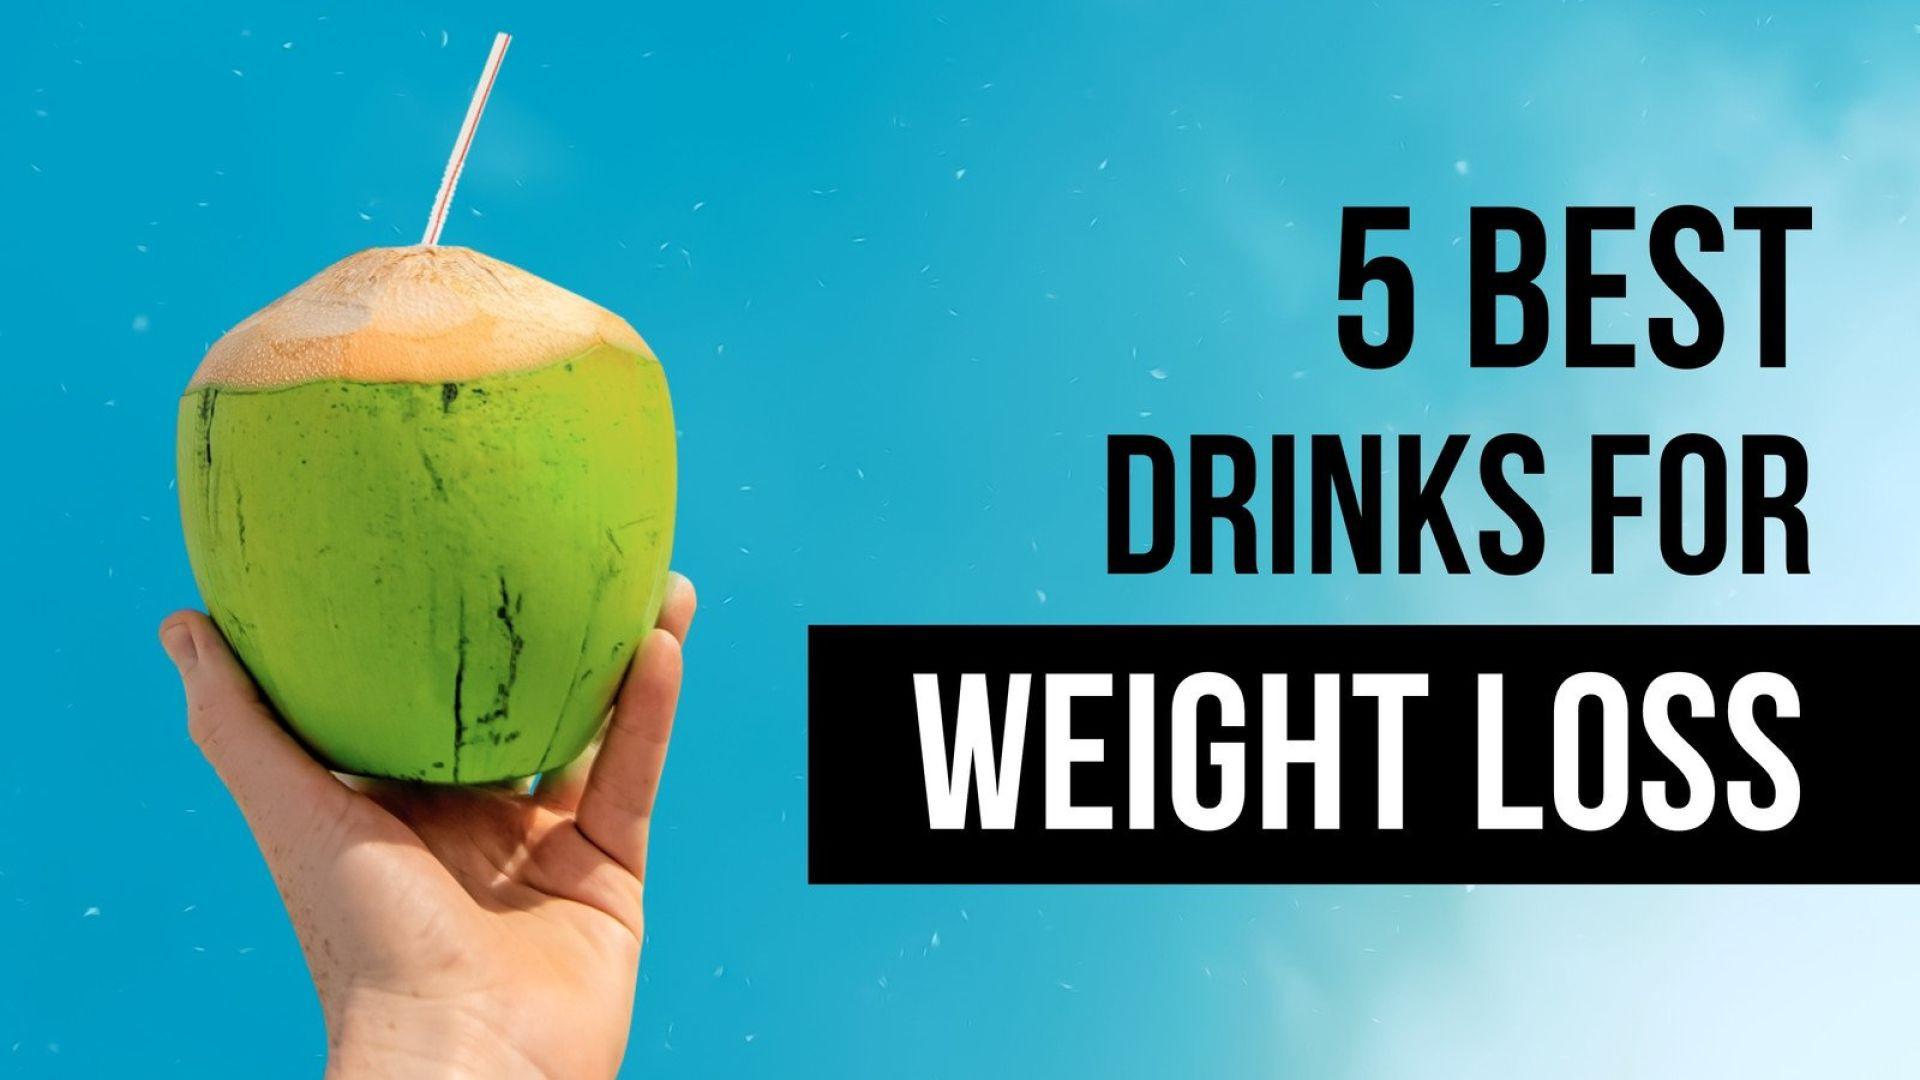 6 effective weightloss tips that will make a BIG difference